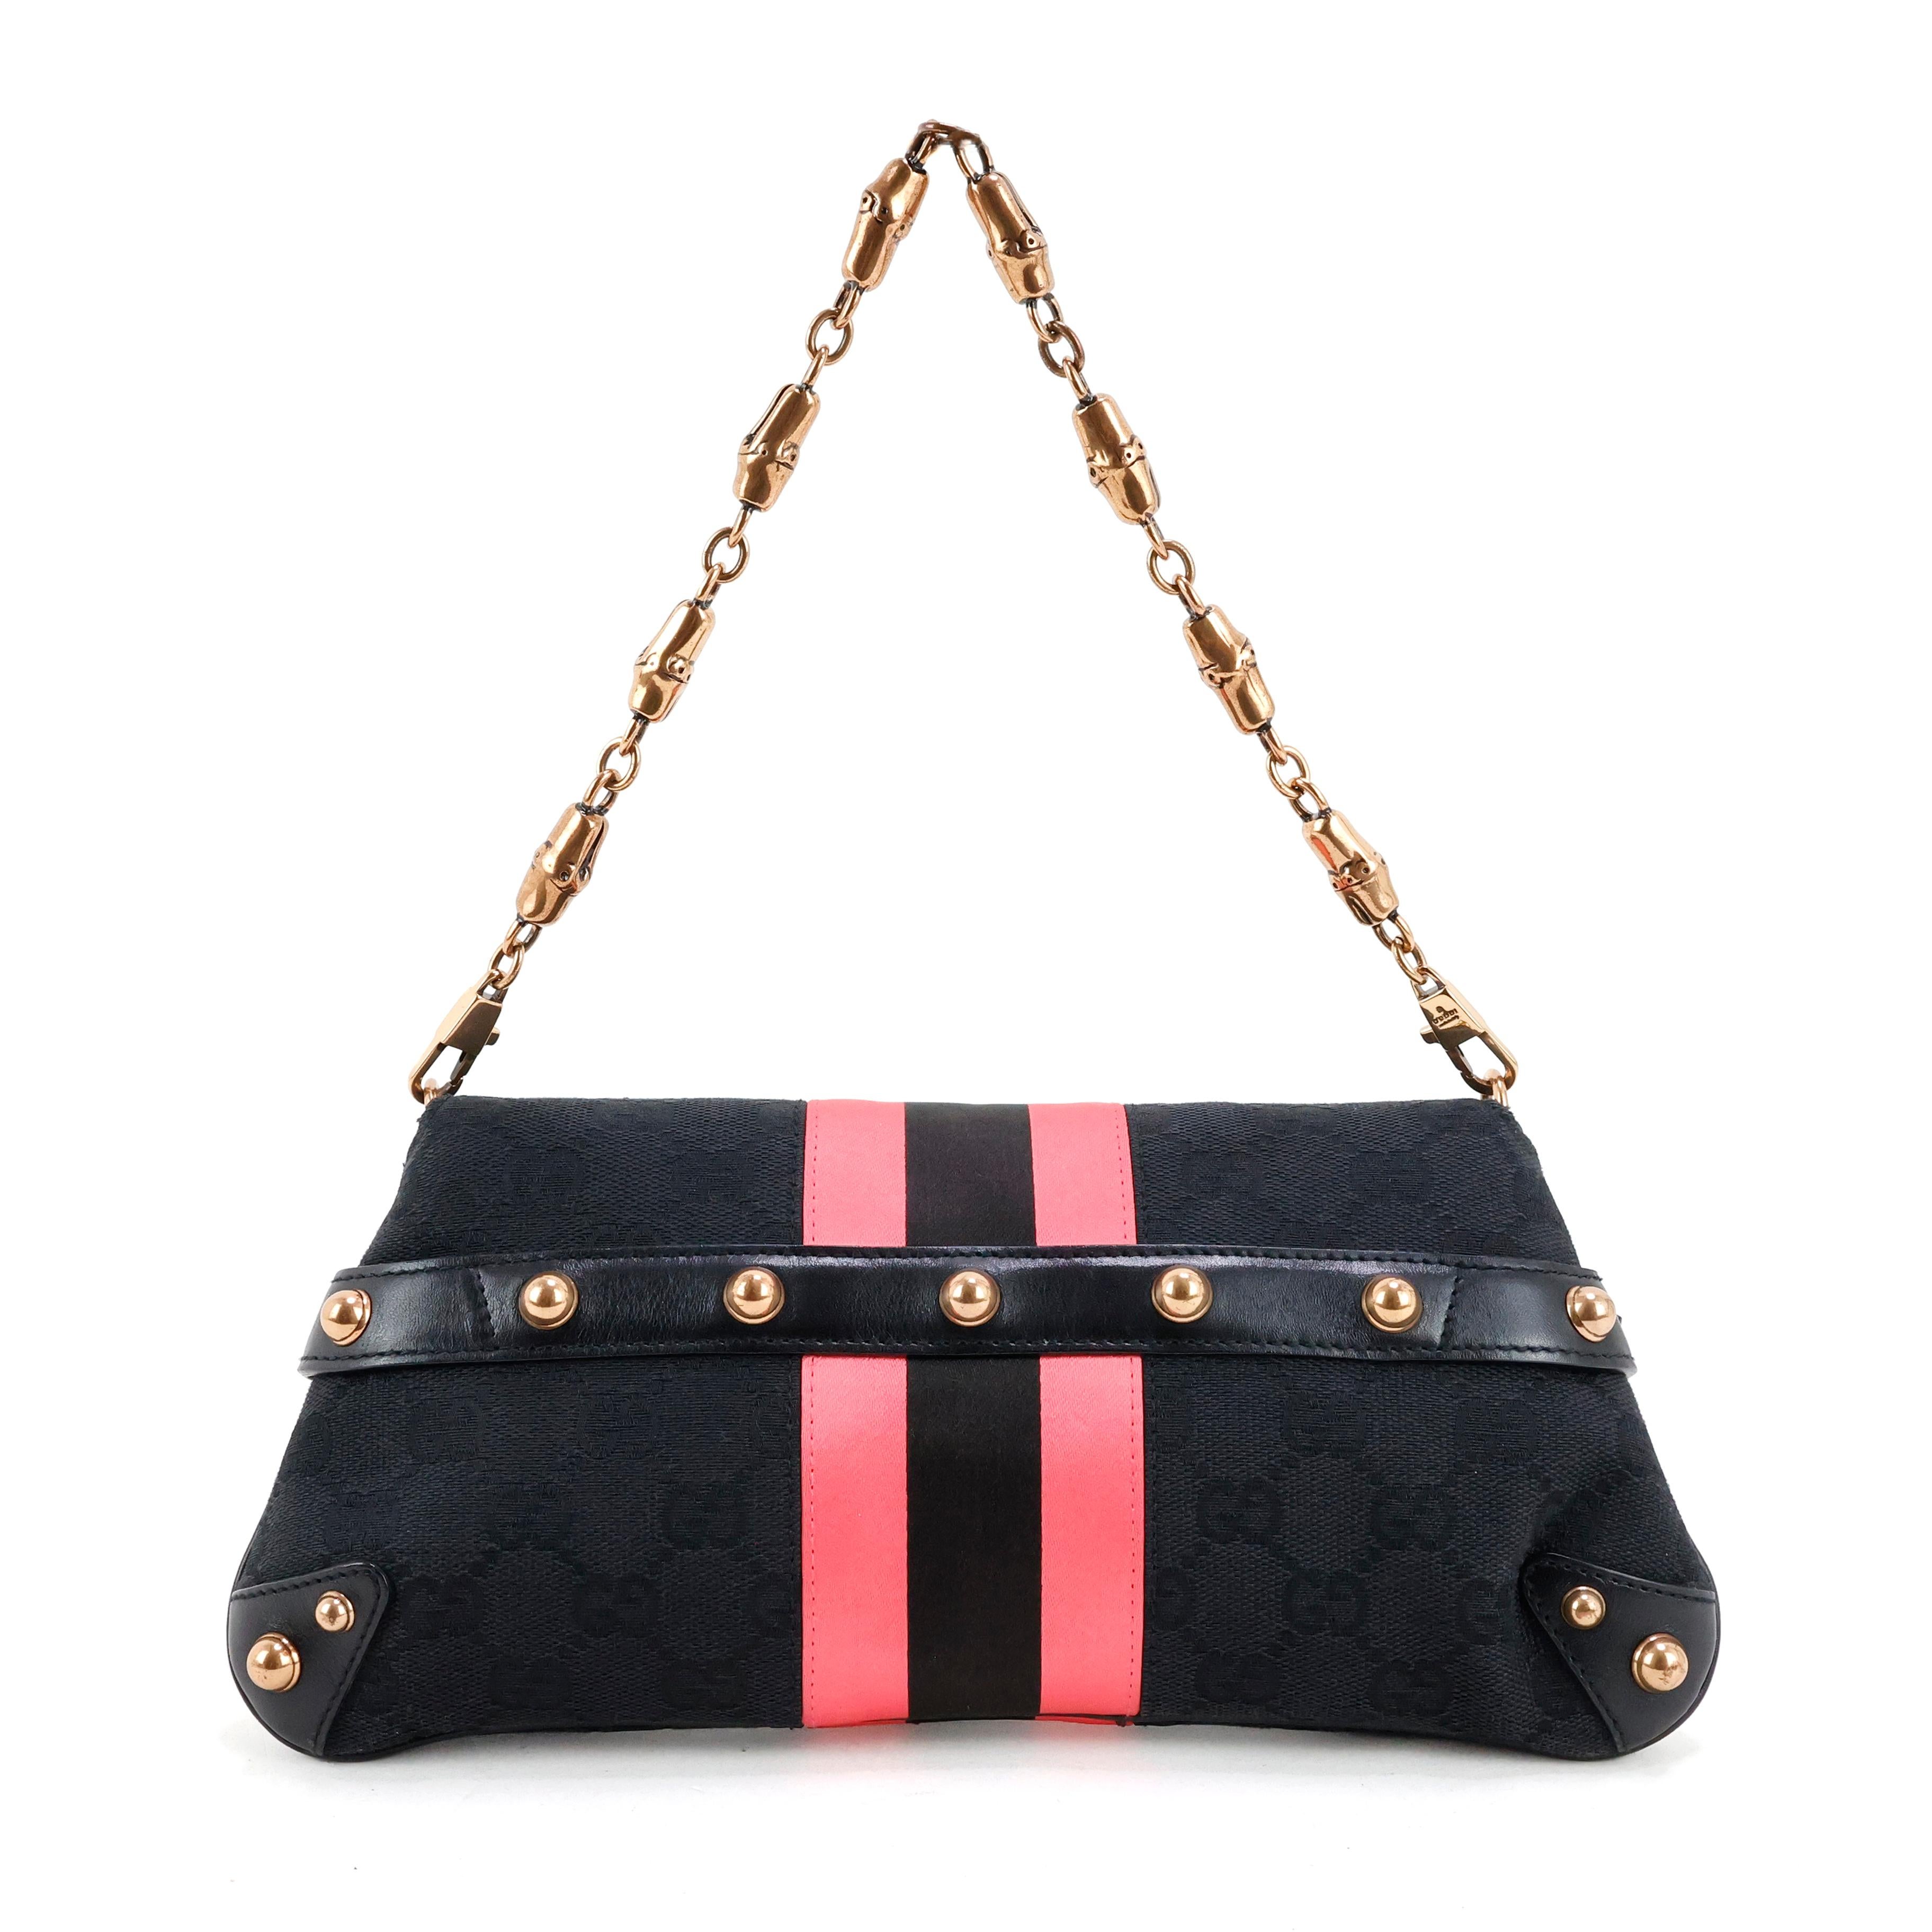 Gucci horsebit bag in black GG supreme canvas, pink satin and leather, copper hardware.

Condition:
Really good.

Packing/accessories:
Dustbag.

Measurements:
28cm x 13cm x 5cm